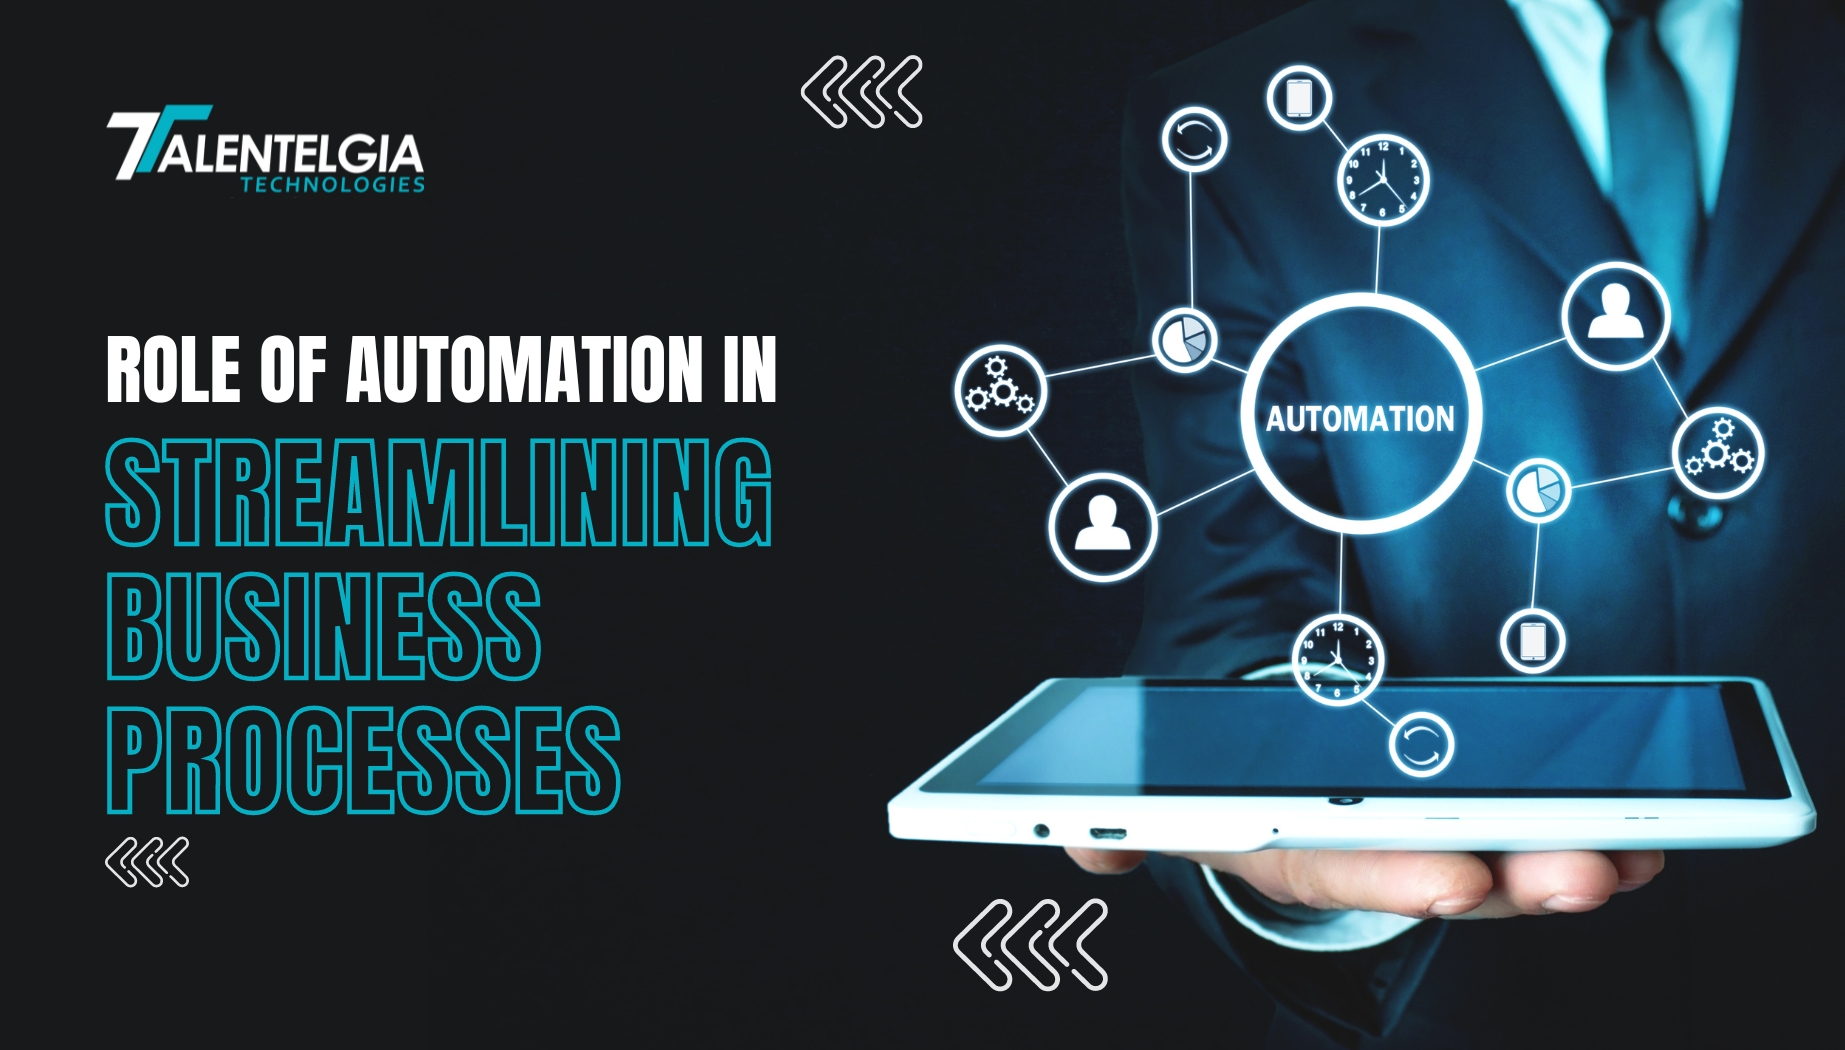 Role of automation in streamlining business processesvvv